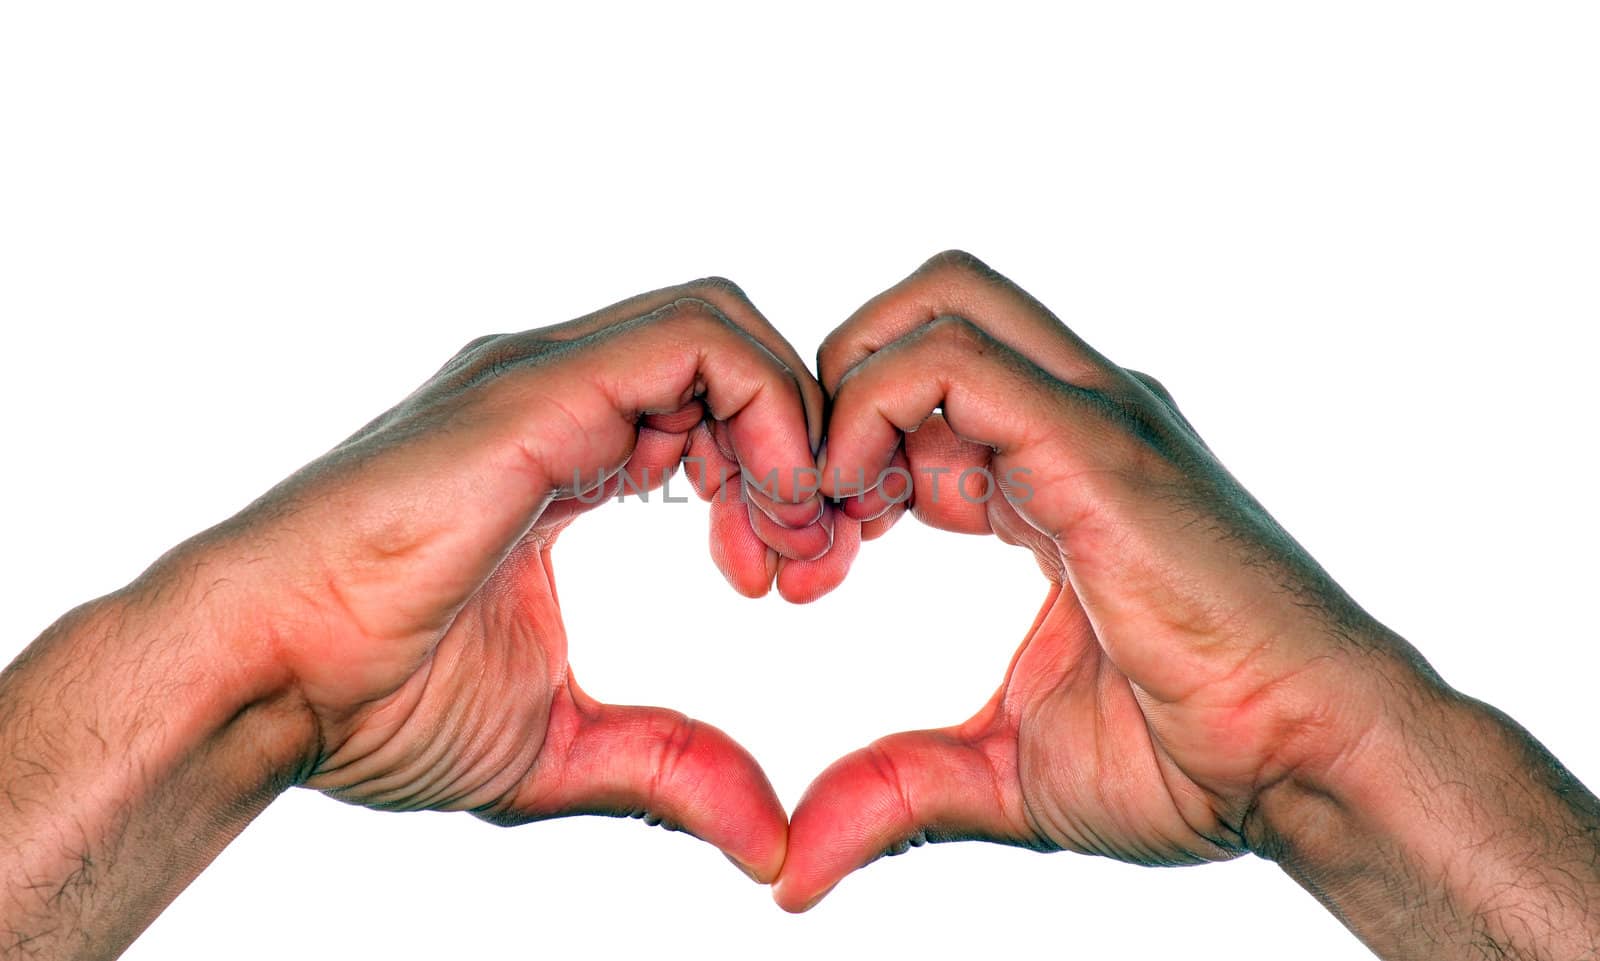 Two male hands making a heart shape against a white background